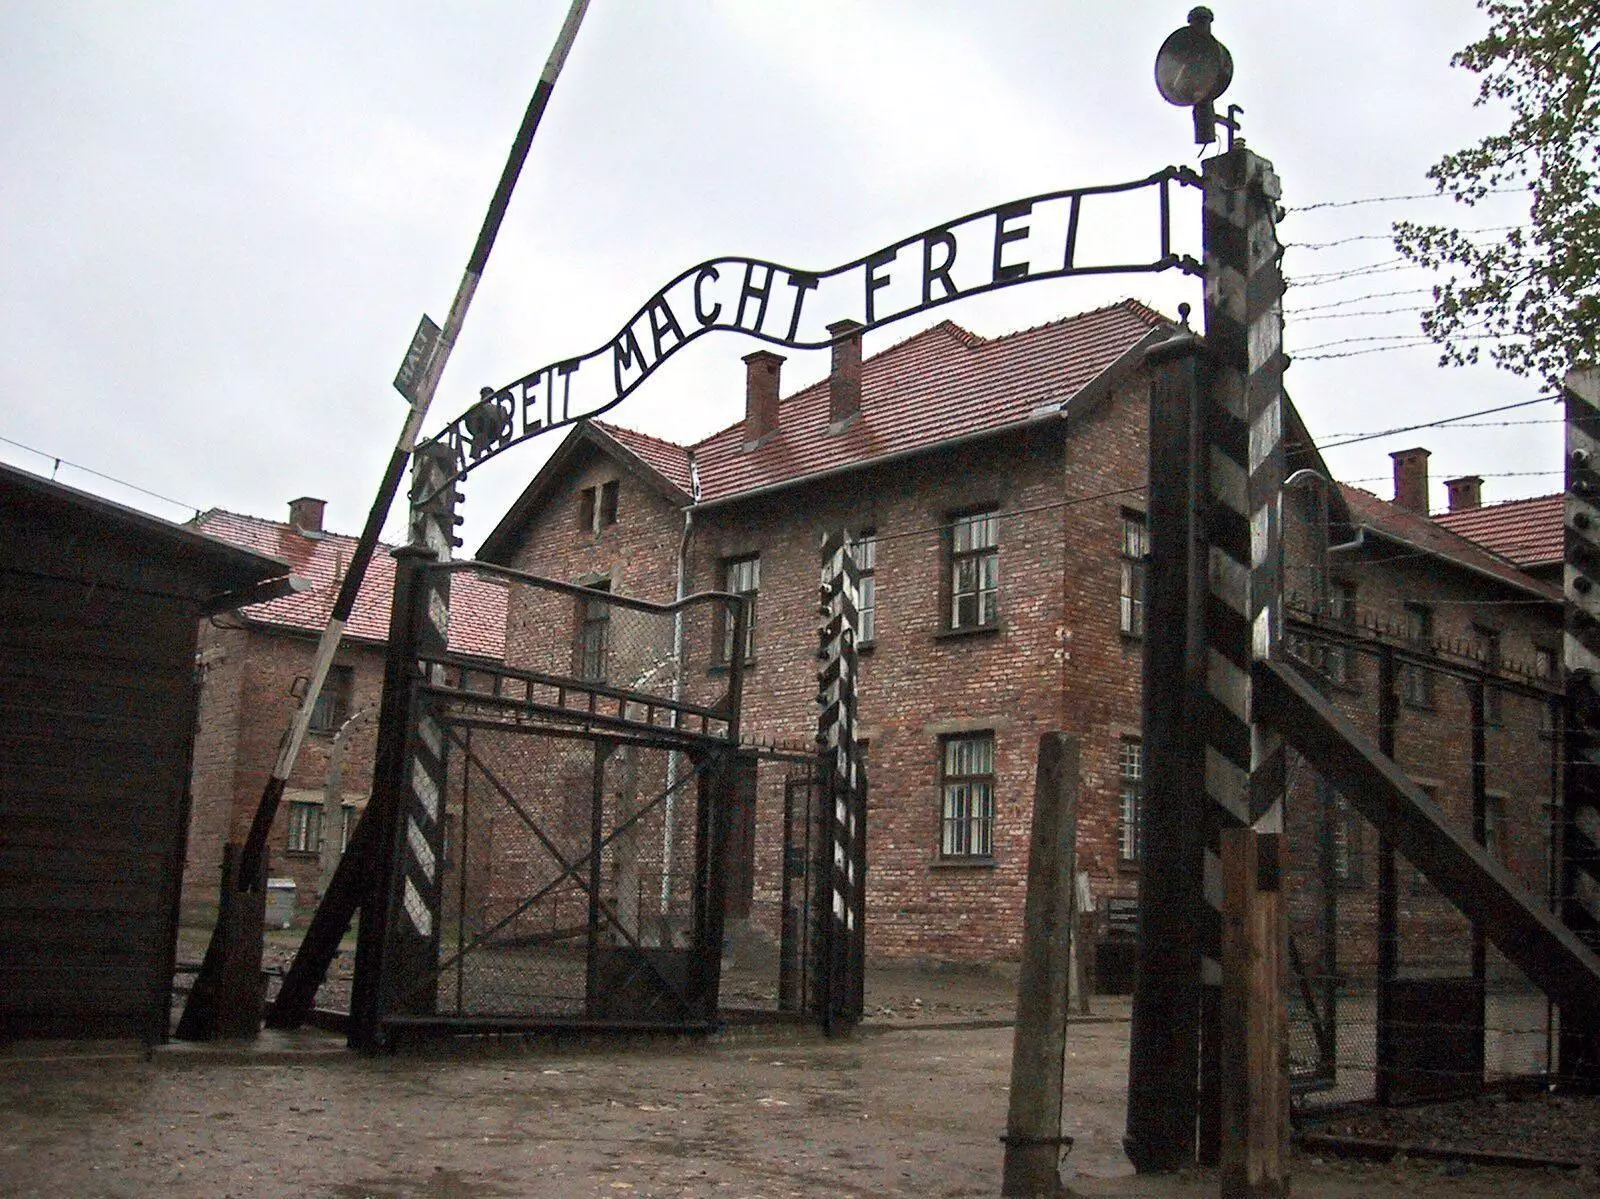 This year marks the 75th anniversary of the Holocaust, which saw six million Jews murdered by the Nazis.